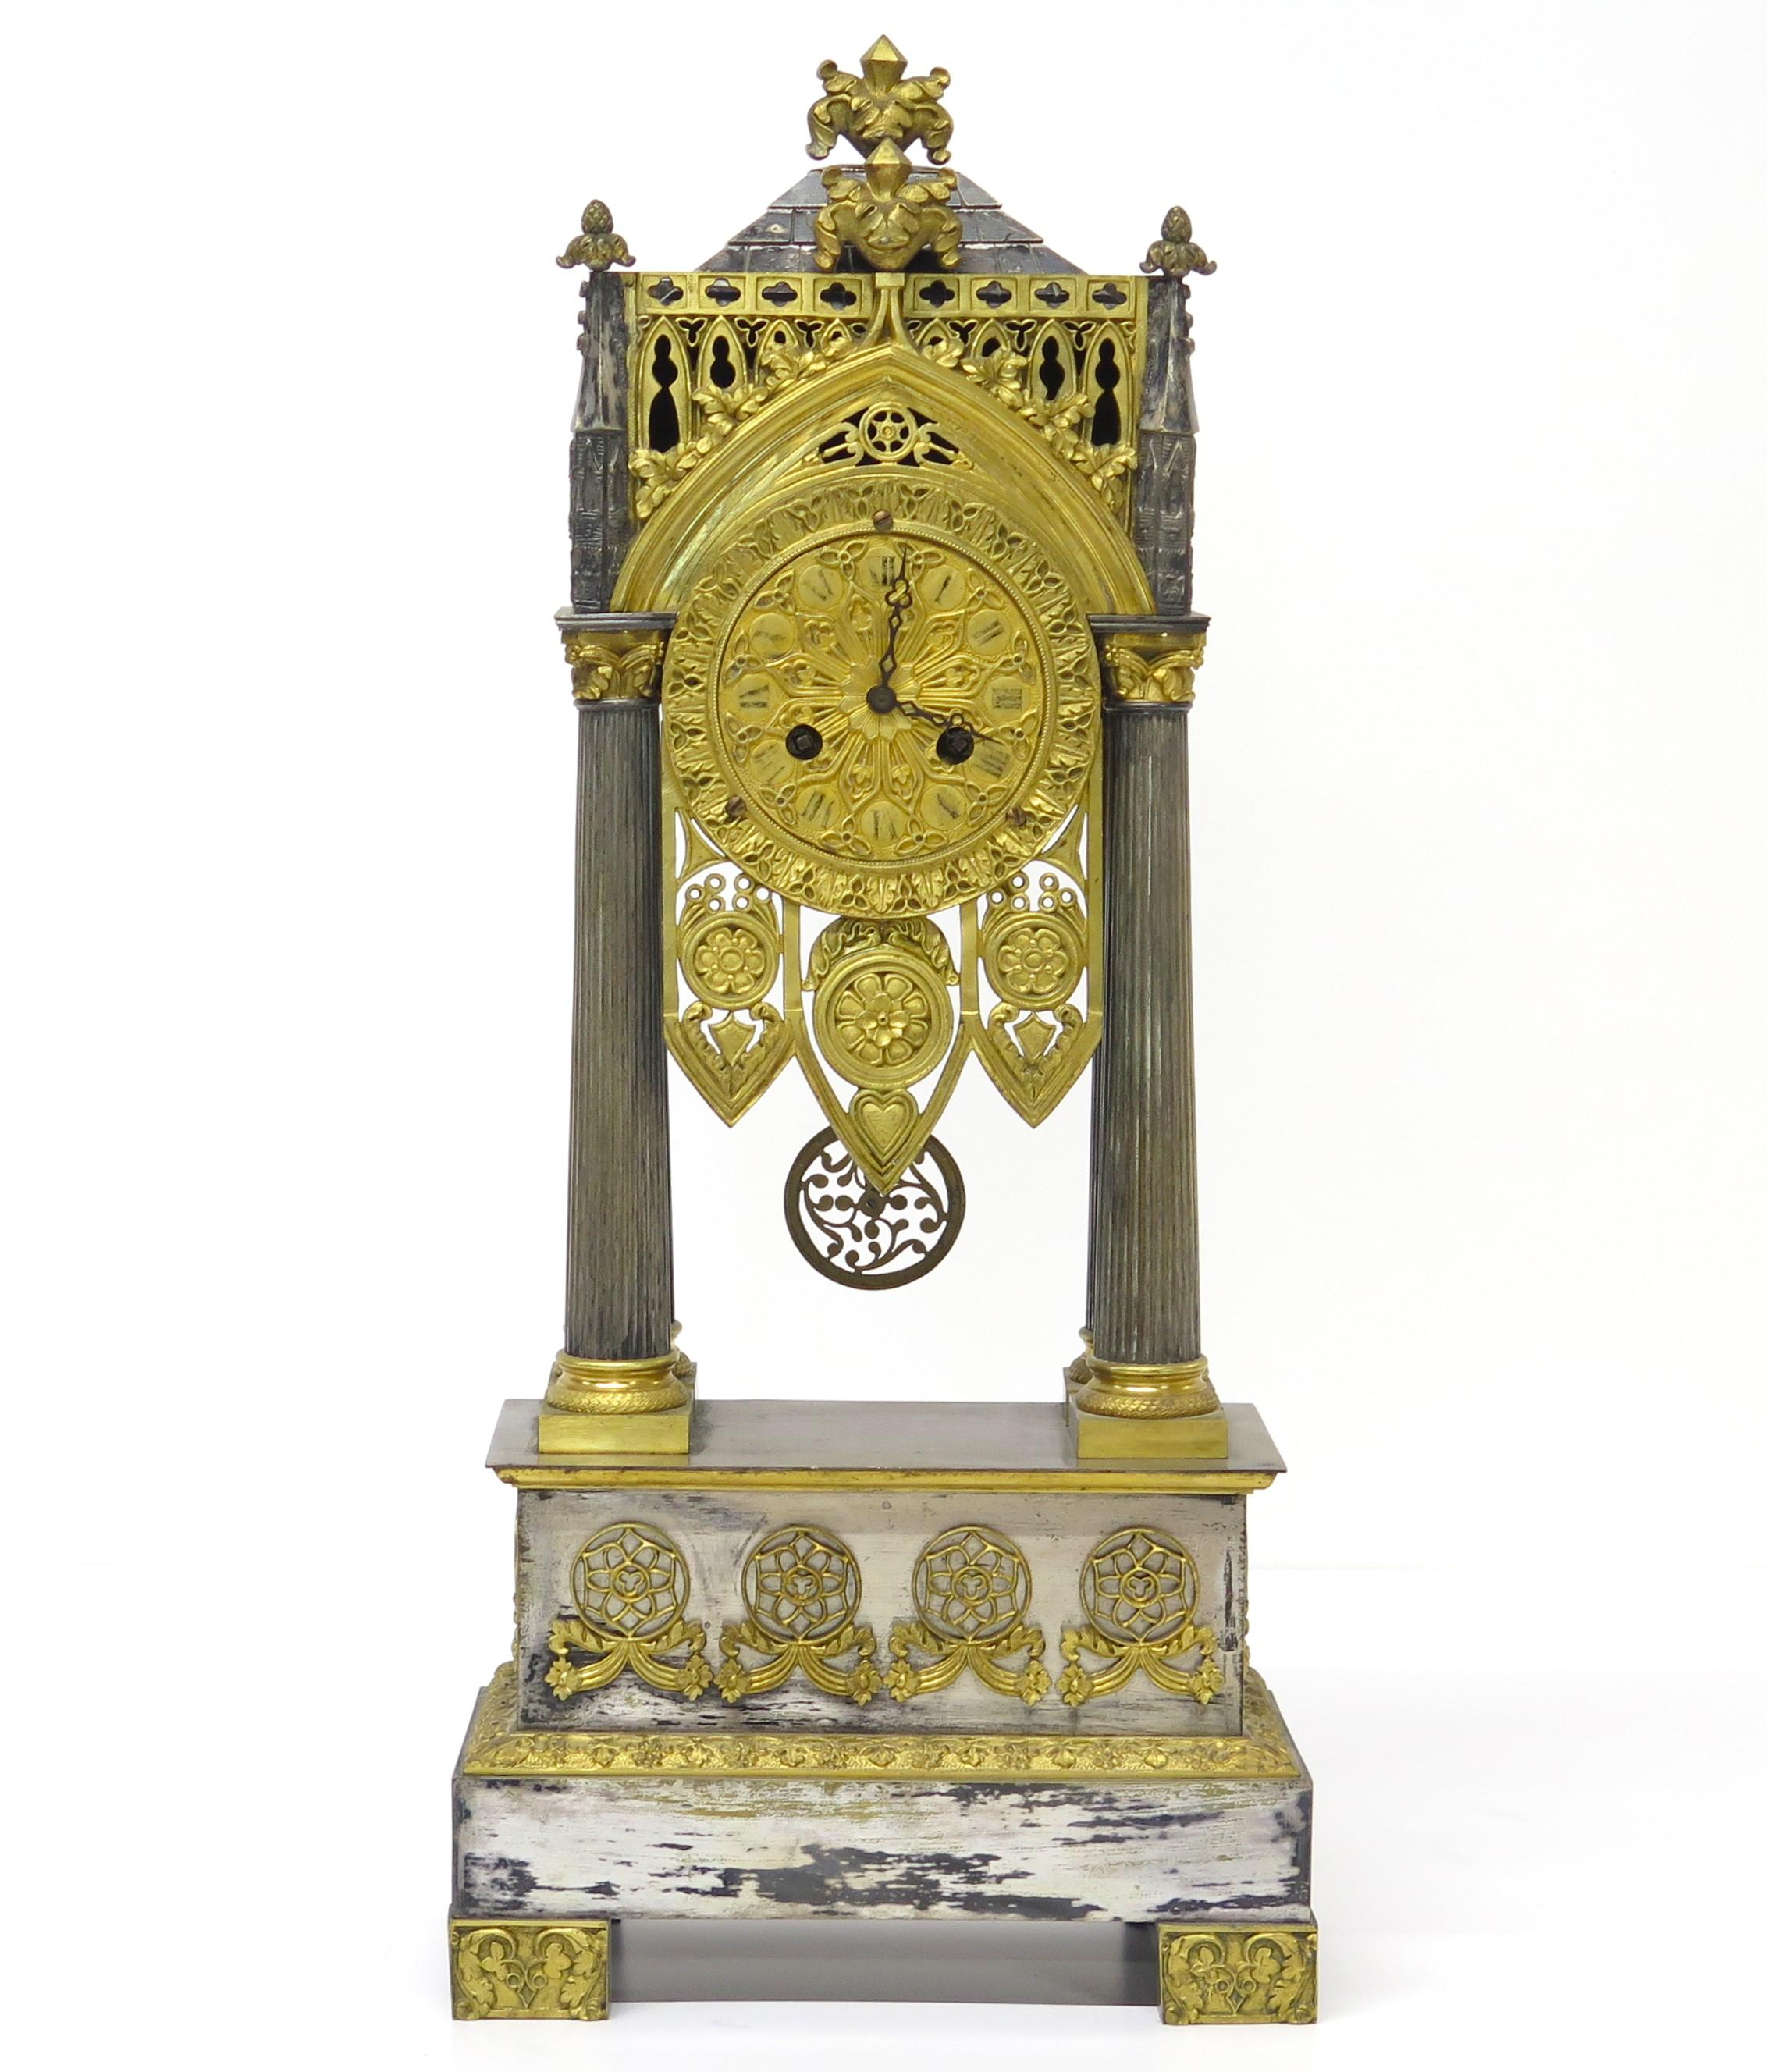 An impressive Charles X gilt and silver clock in the gothic taste, France. Circa 1825